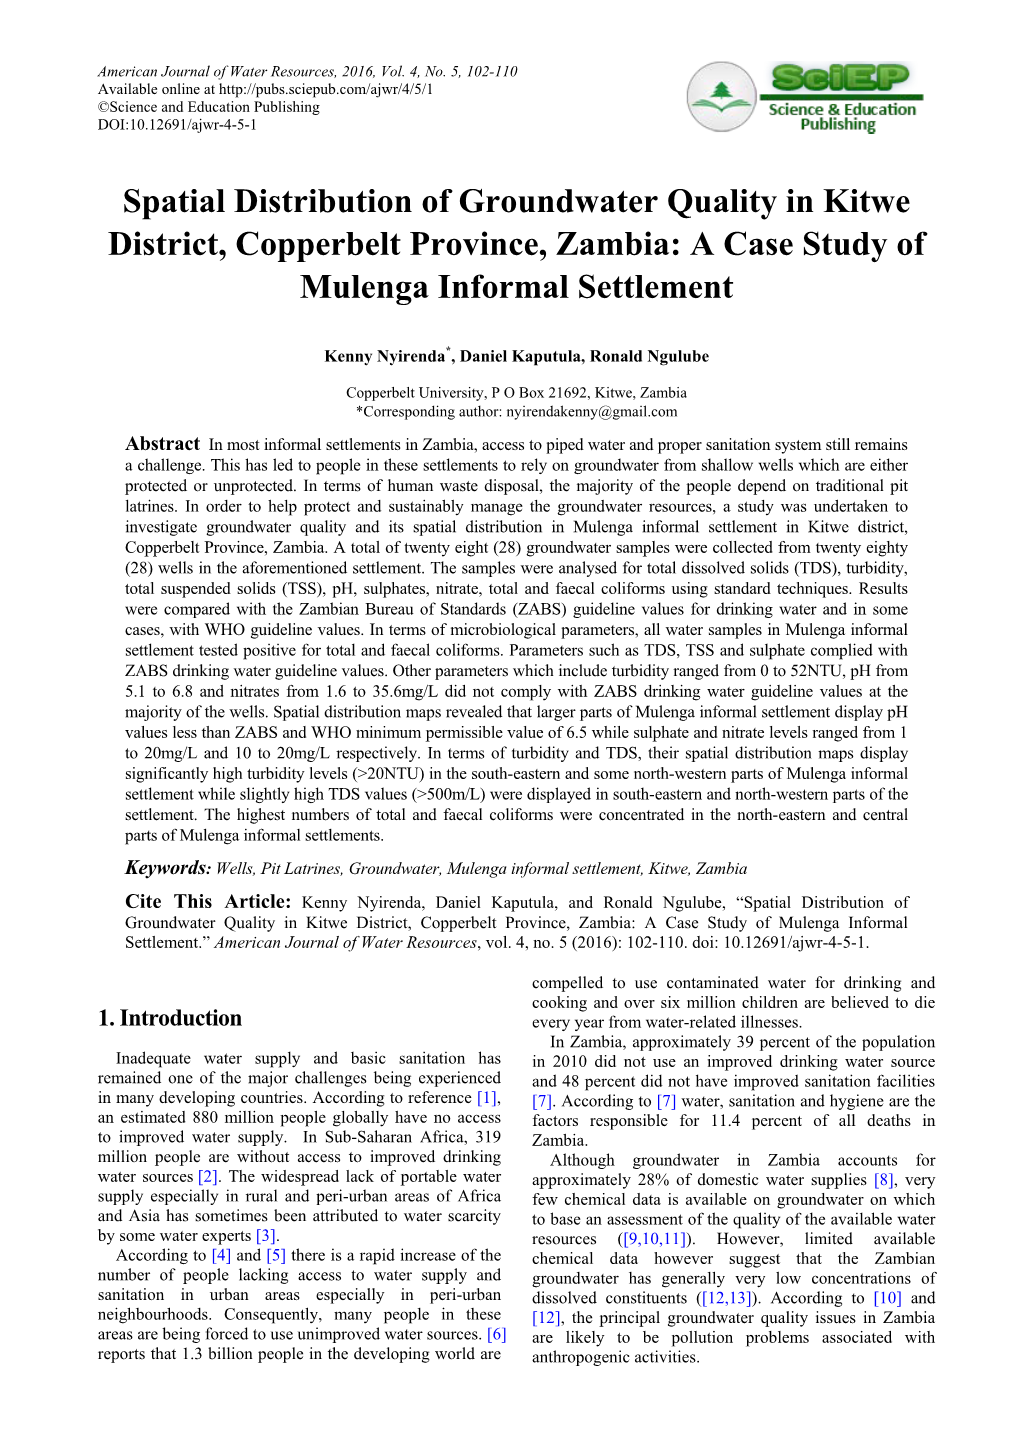 Spatial Distribution of Groundwater Quality in Kitwe District, Copperbelt Province, Zambia: a Case Study of Mulenga Informal Settlement